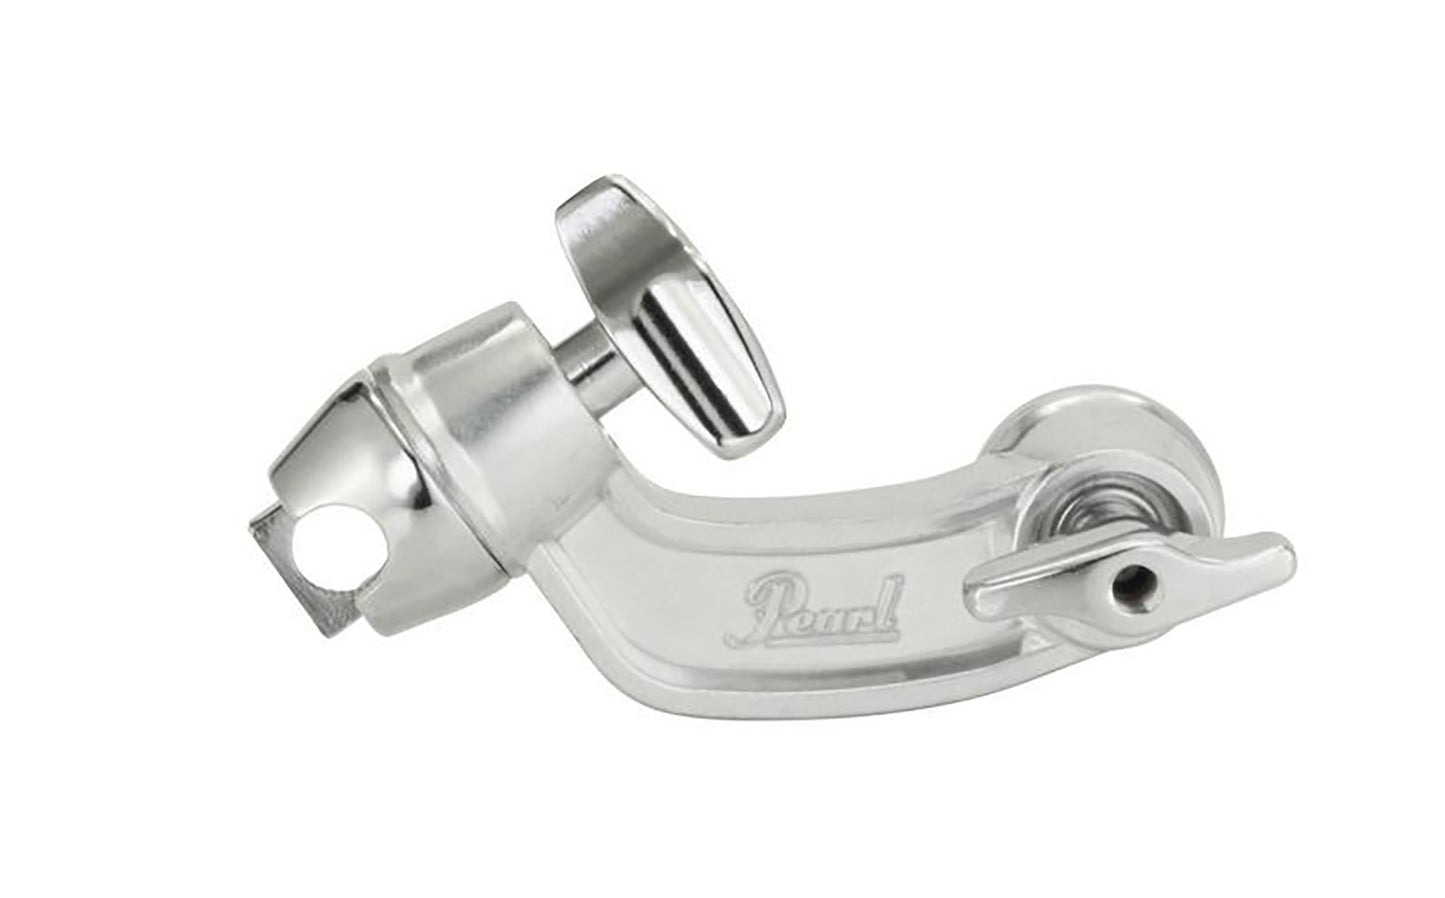 Pearl CHA70 Uni-Lock Arm and Leg Cymbal Adapter Multi-Positional with Uni-Lock Tilter Swivel Joint Two-Way Clamp